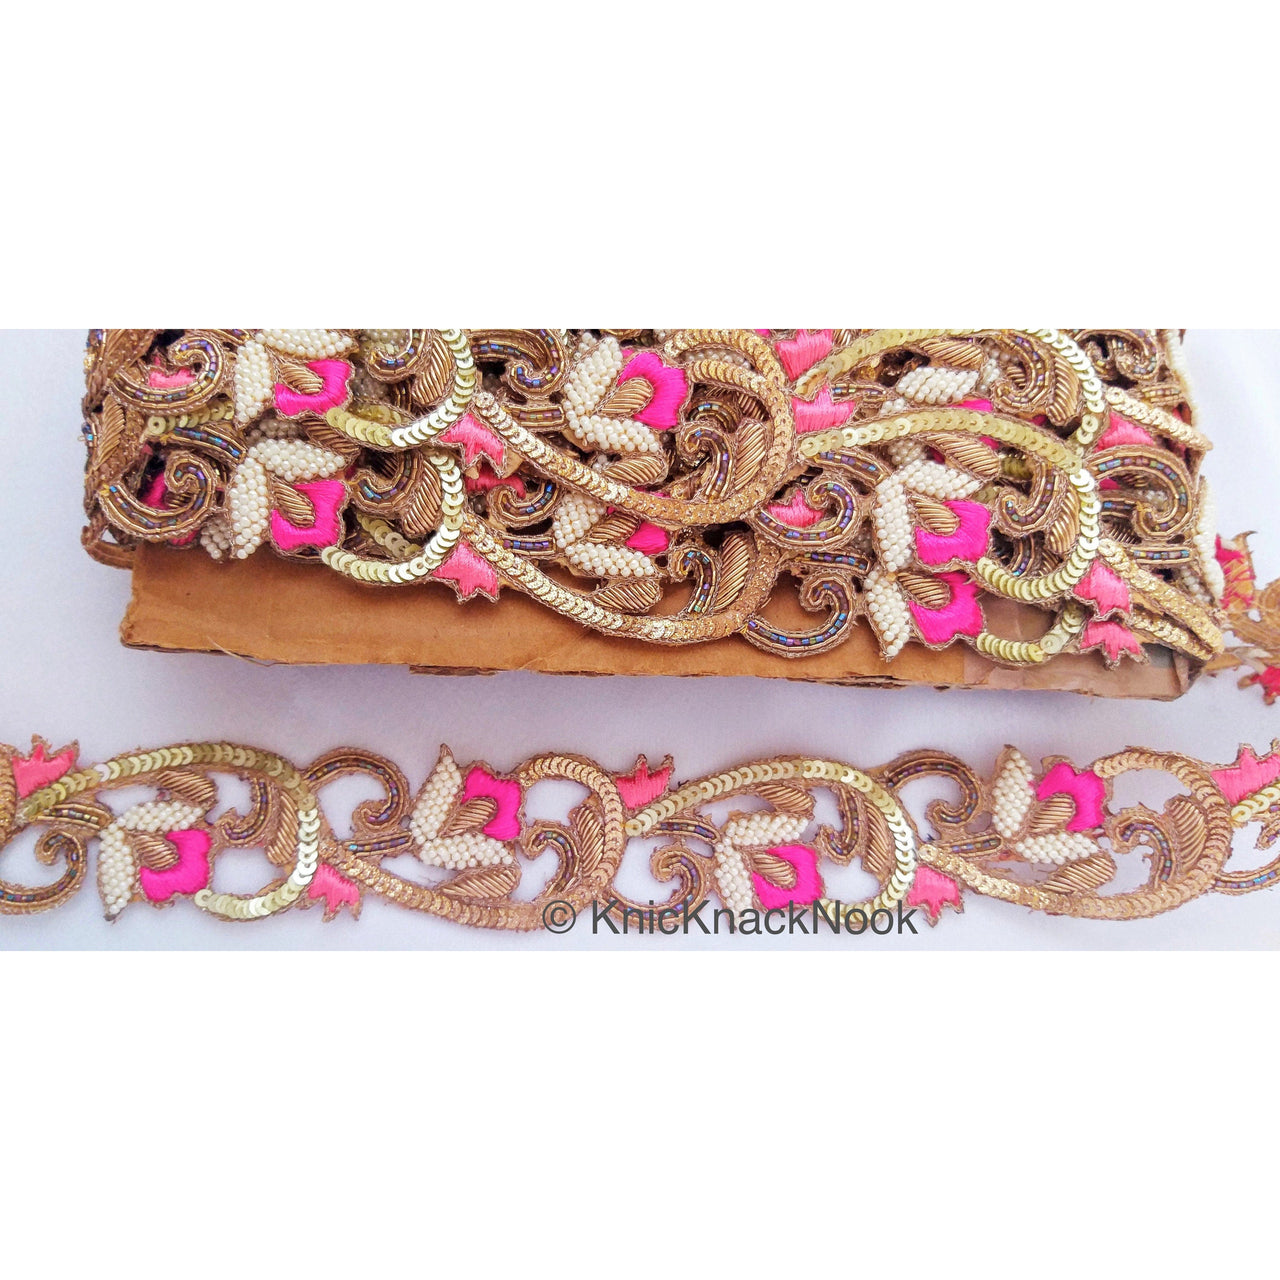 Hand Embroidered Lace Trim, Pink Floral Embroidery, Beaded In Off White Seed Beads & Bugle Beads